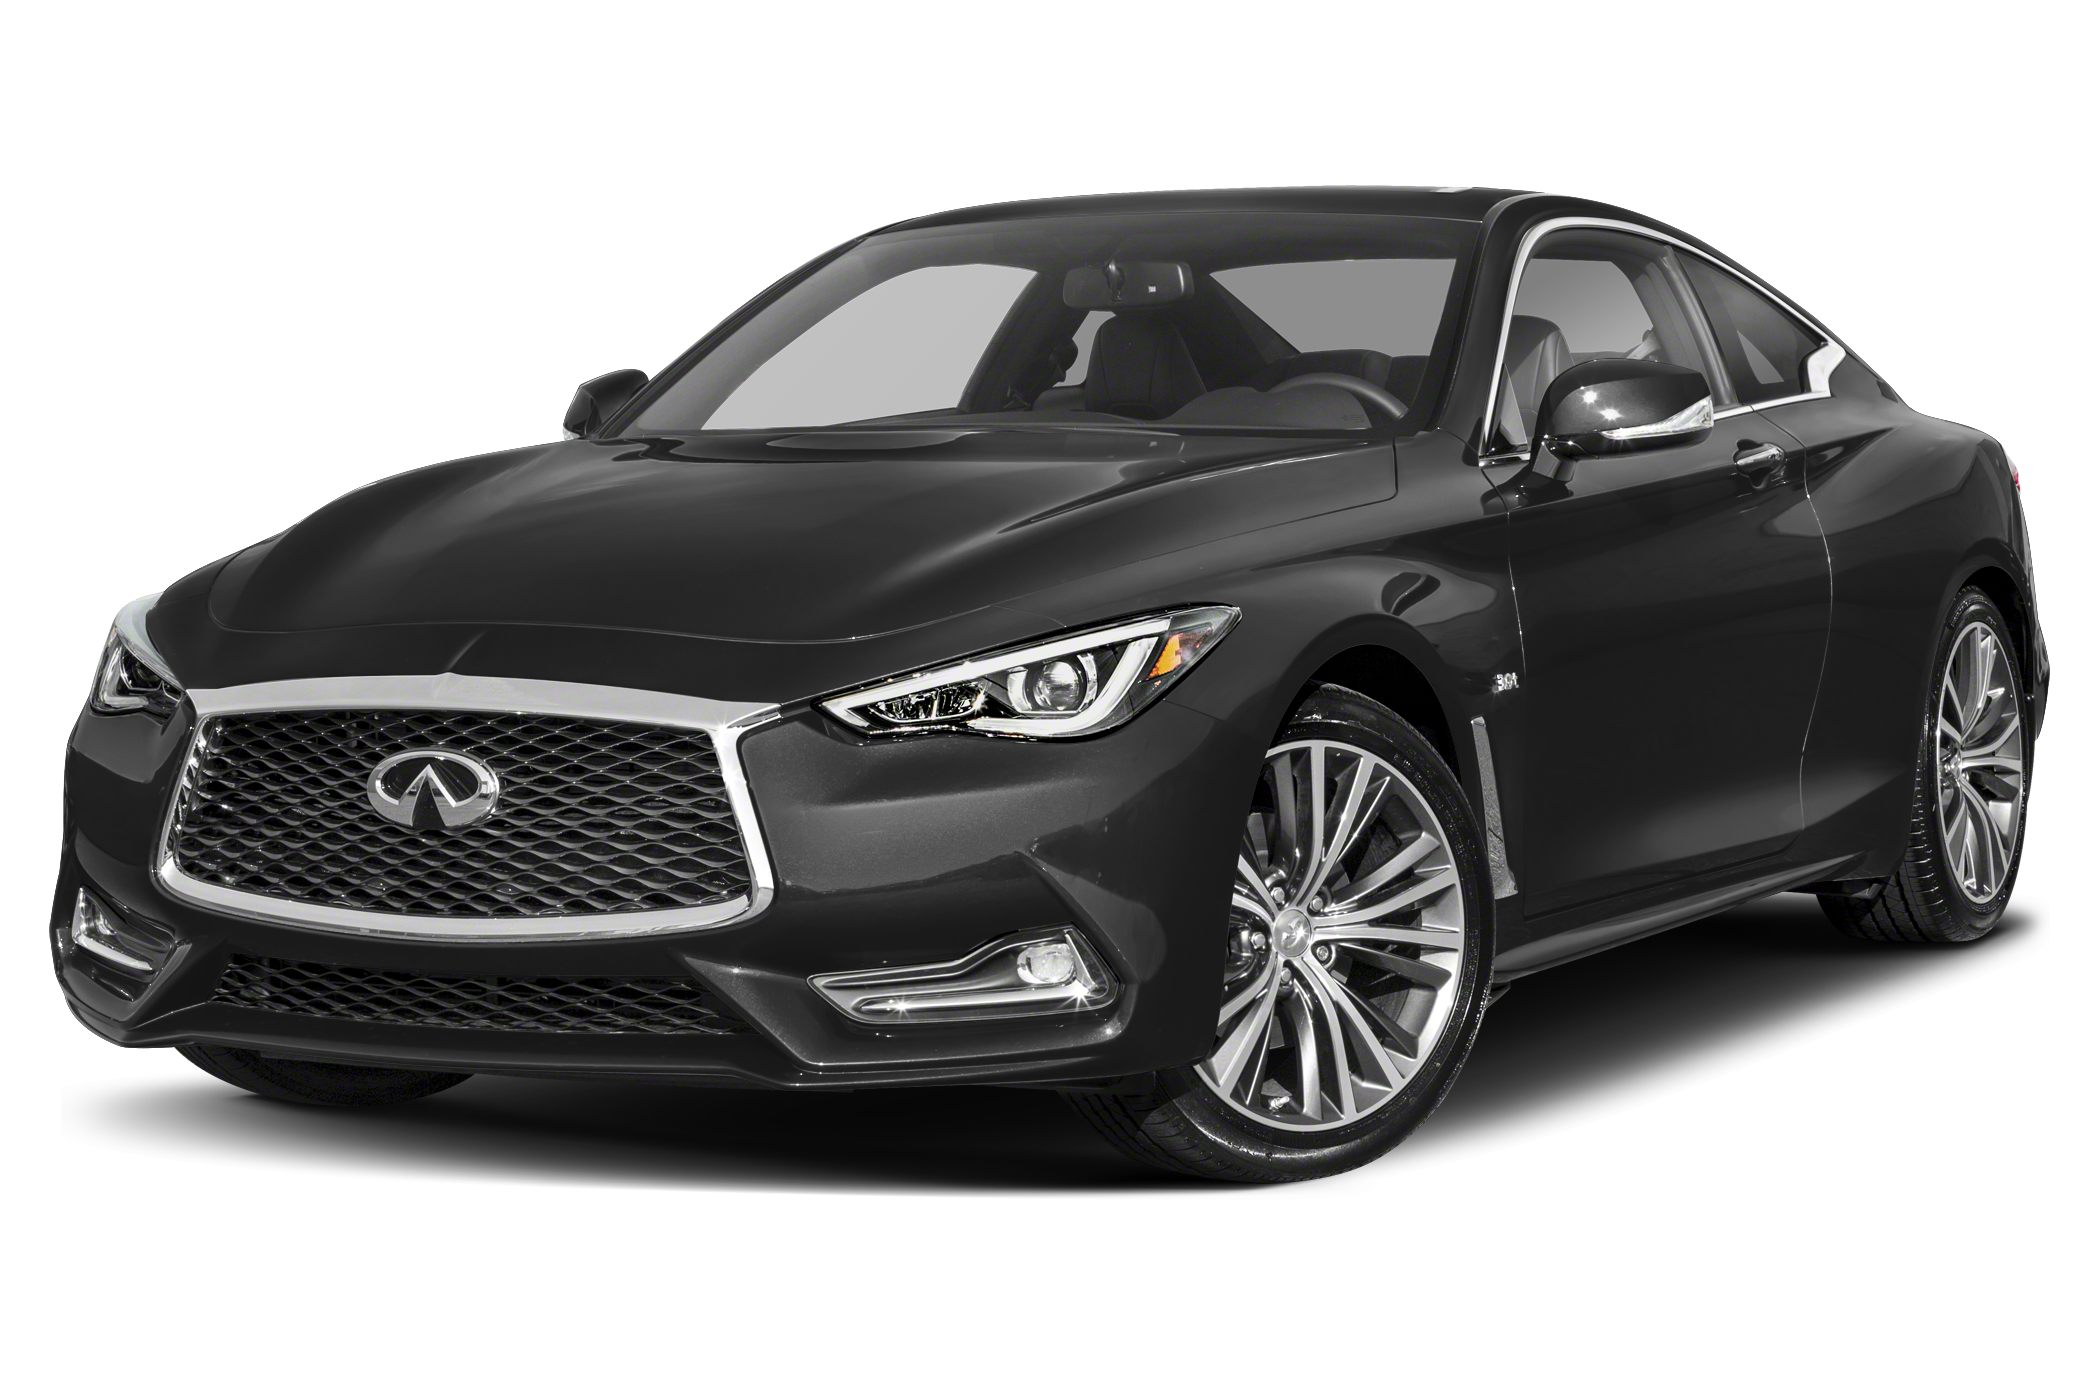 2020 Infiniti Q60 3 0t Pure 2dr Rear Wheel Drive Coupe Pictures